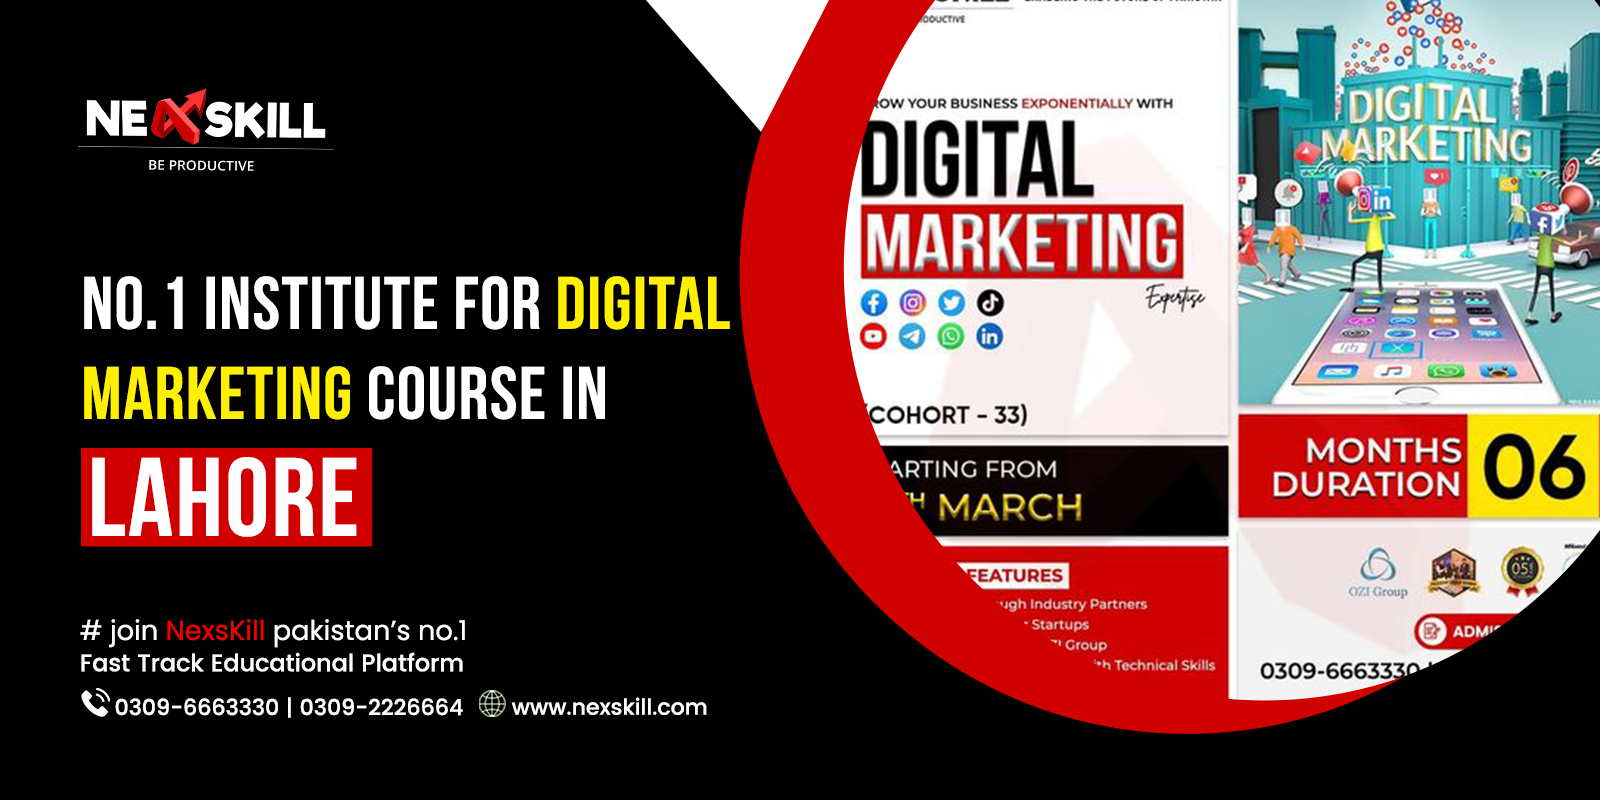 No.1 Institute For Digital Marketing Course in Lahore